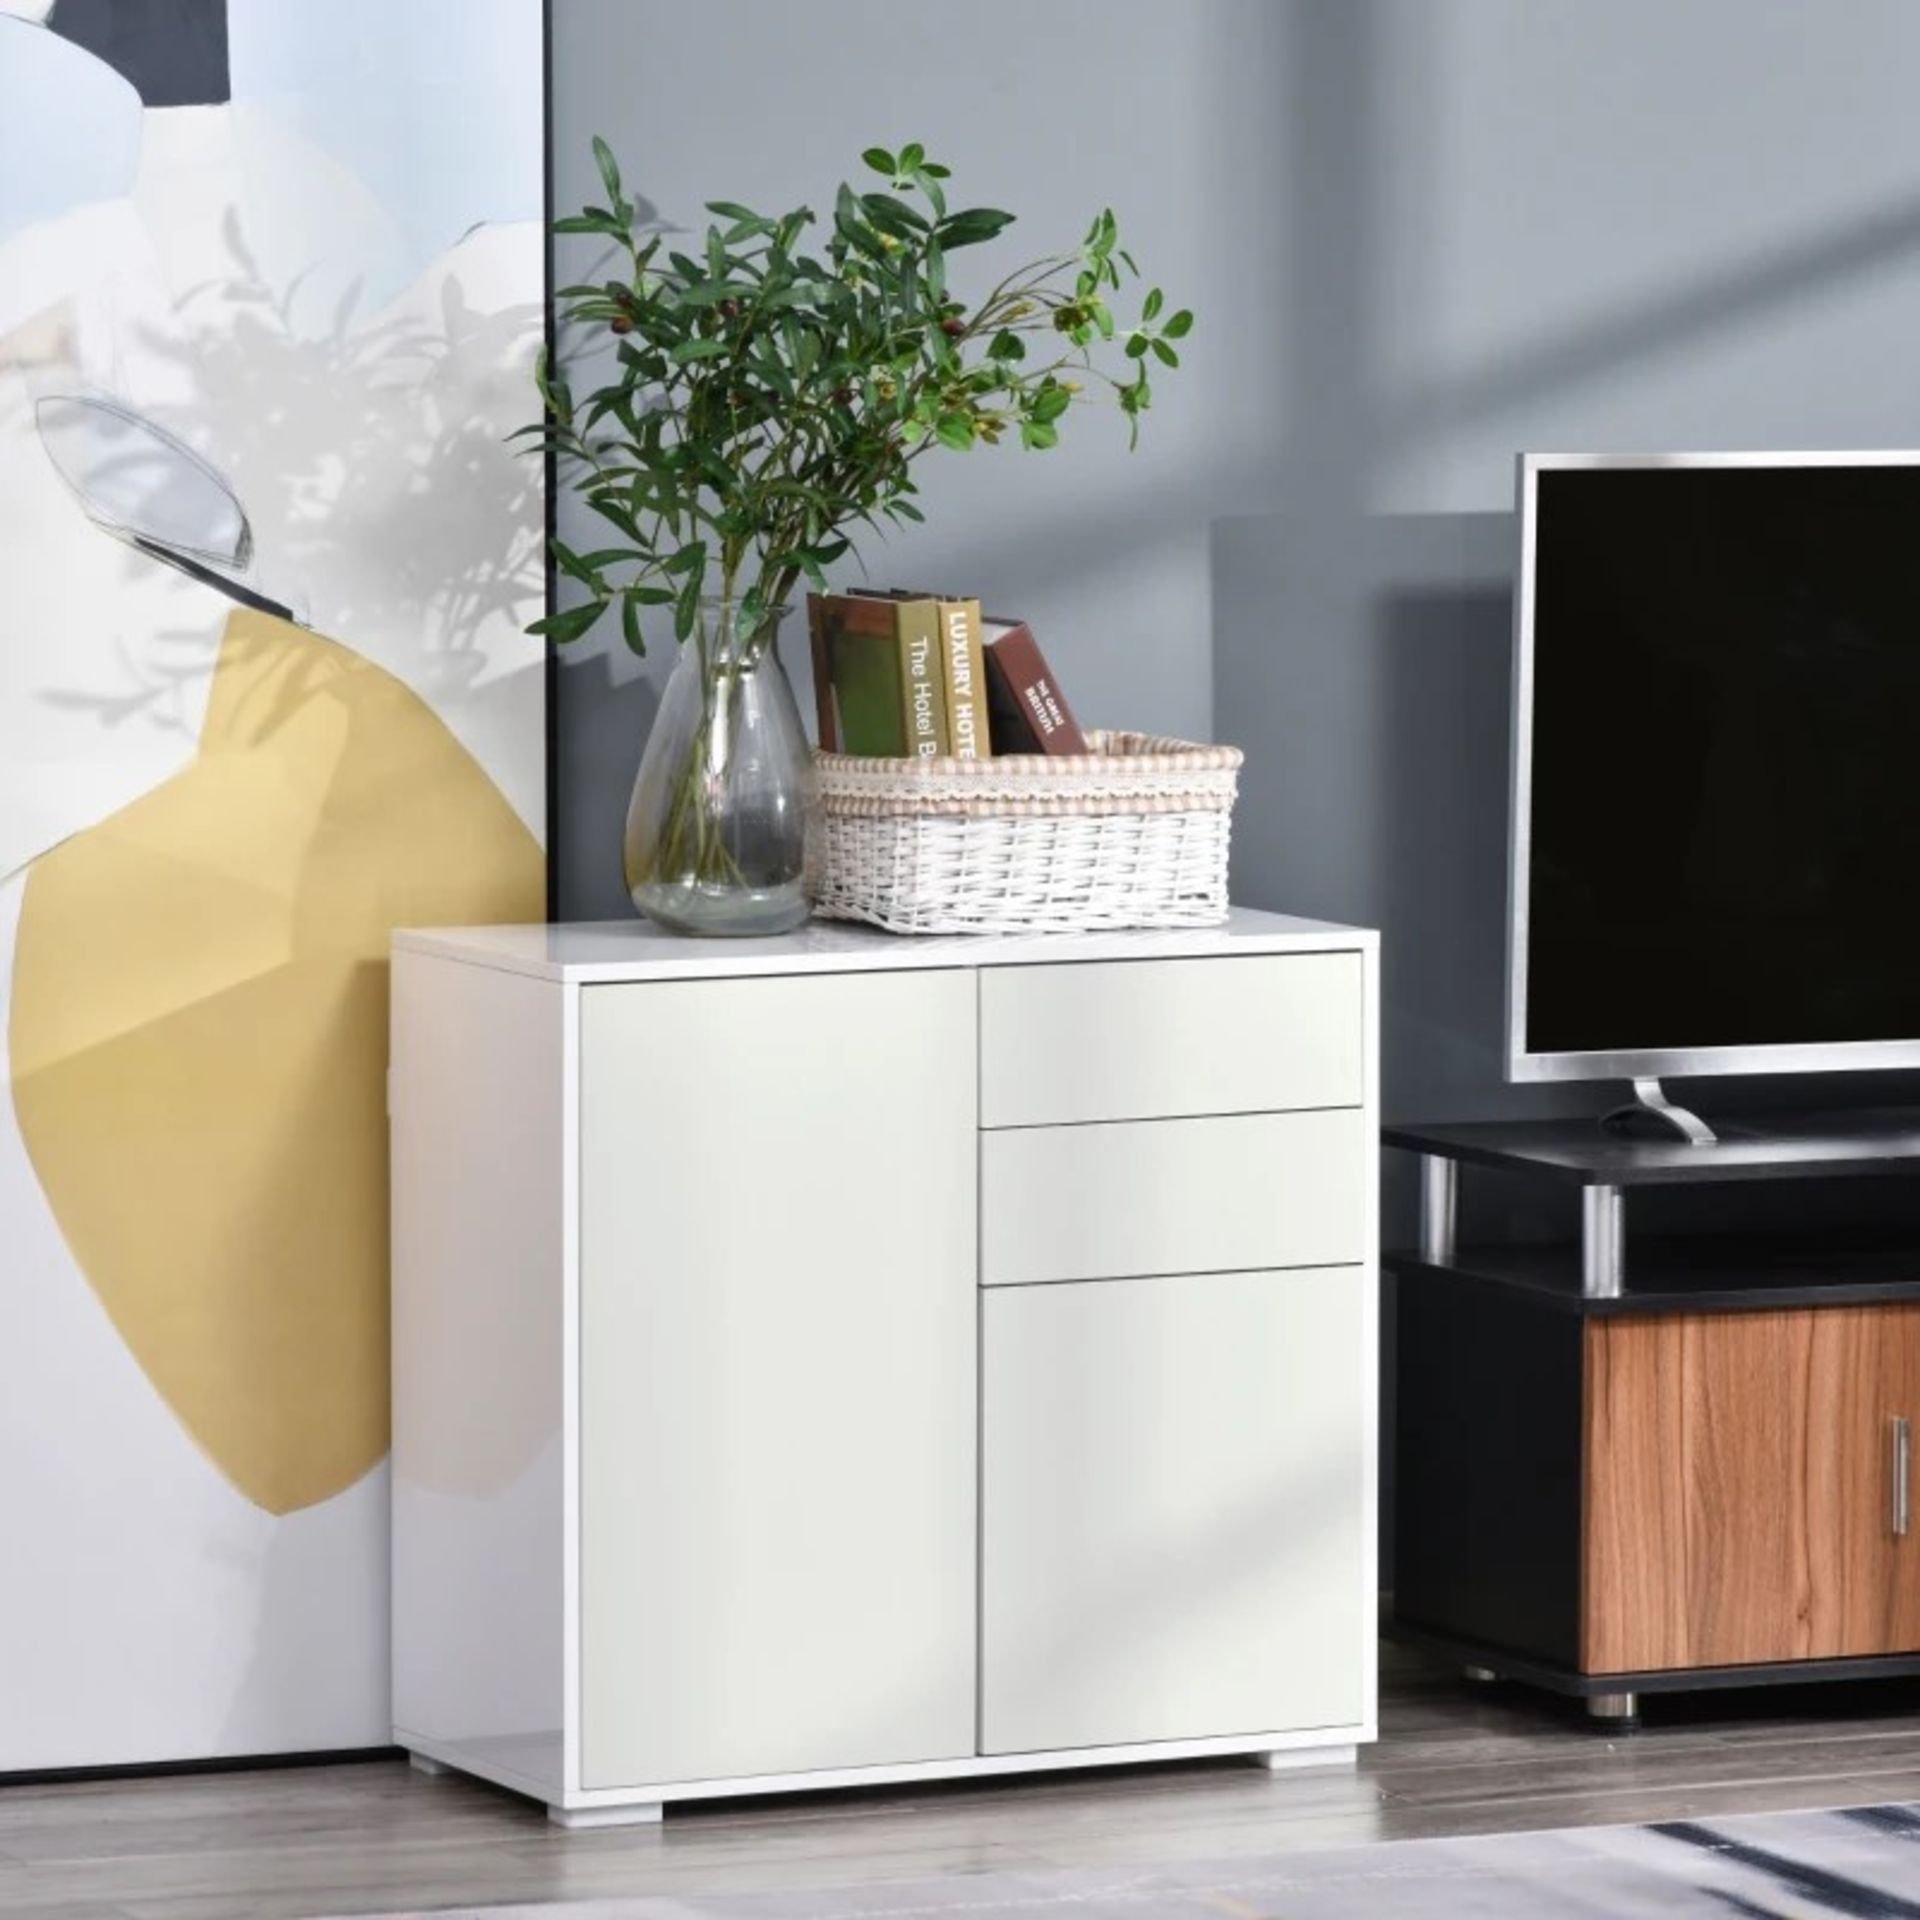 RRP £109.99 - HOMCOM Push-Open Two-Drawer Cabinet, with Two Doors – White - DIMENSIONS: Overall